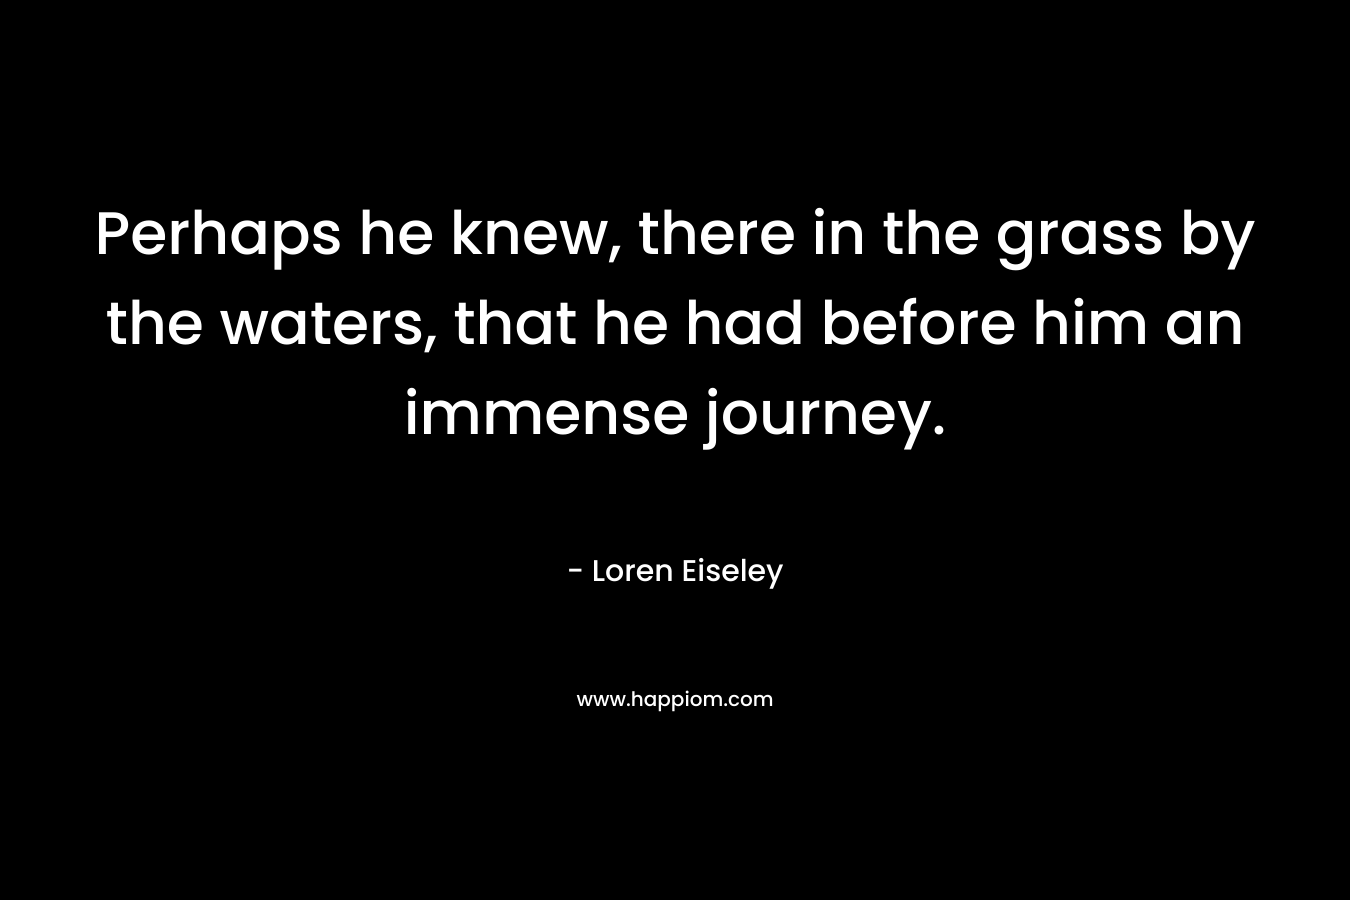 Perhaps he knew, there in the grass by the waters, that he had before him an immense journey. – Loren Eiseley